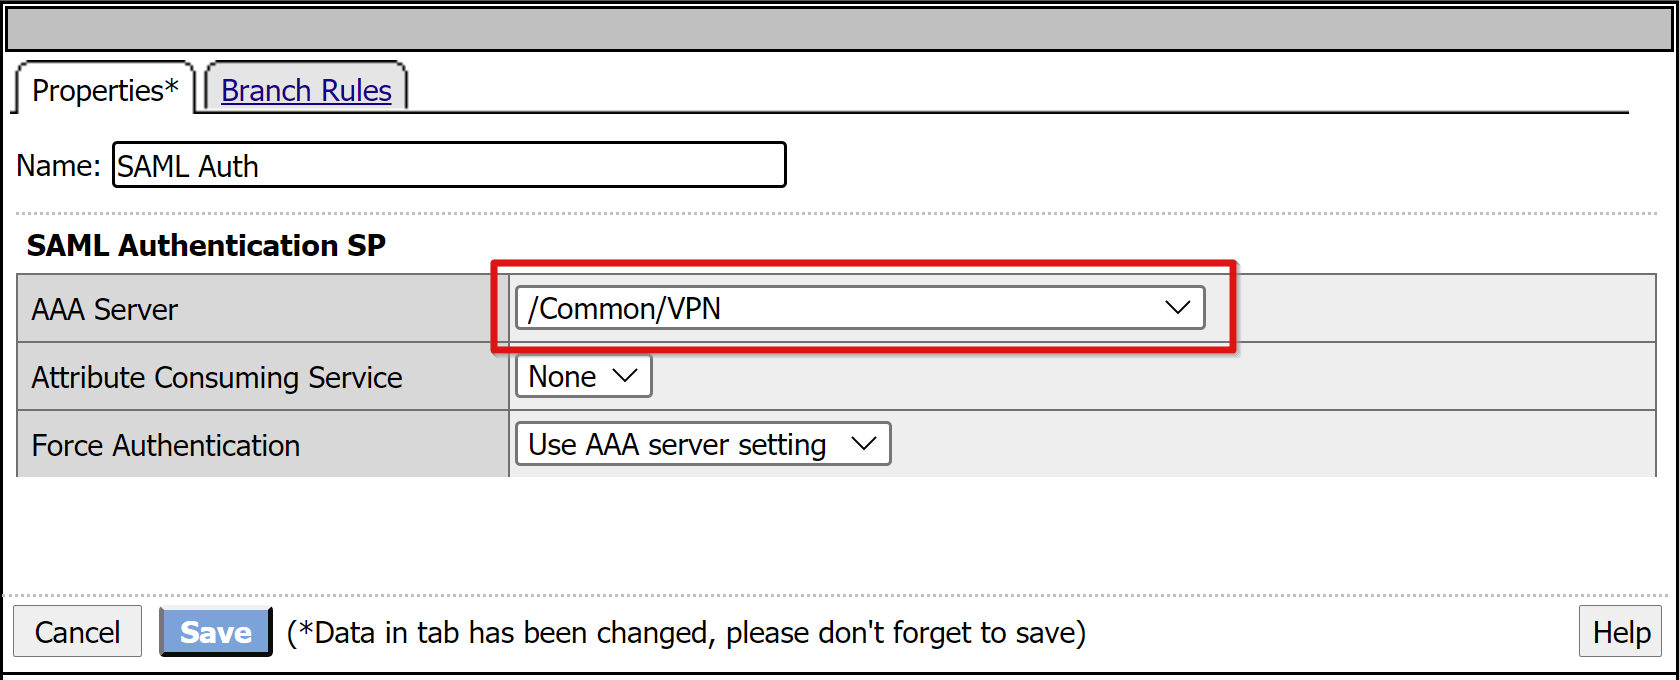 Screenshot of the AAA Server entry under SAML Authentication SP, on the Properties tab.